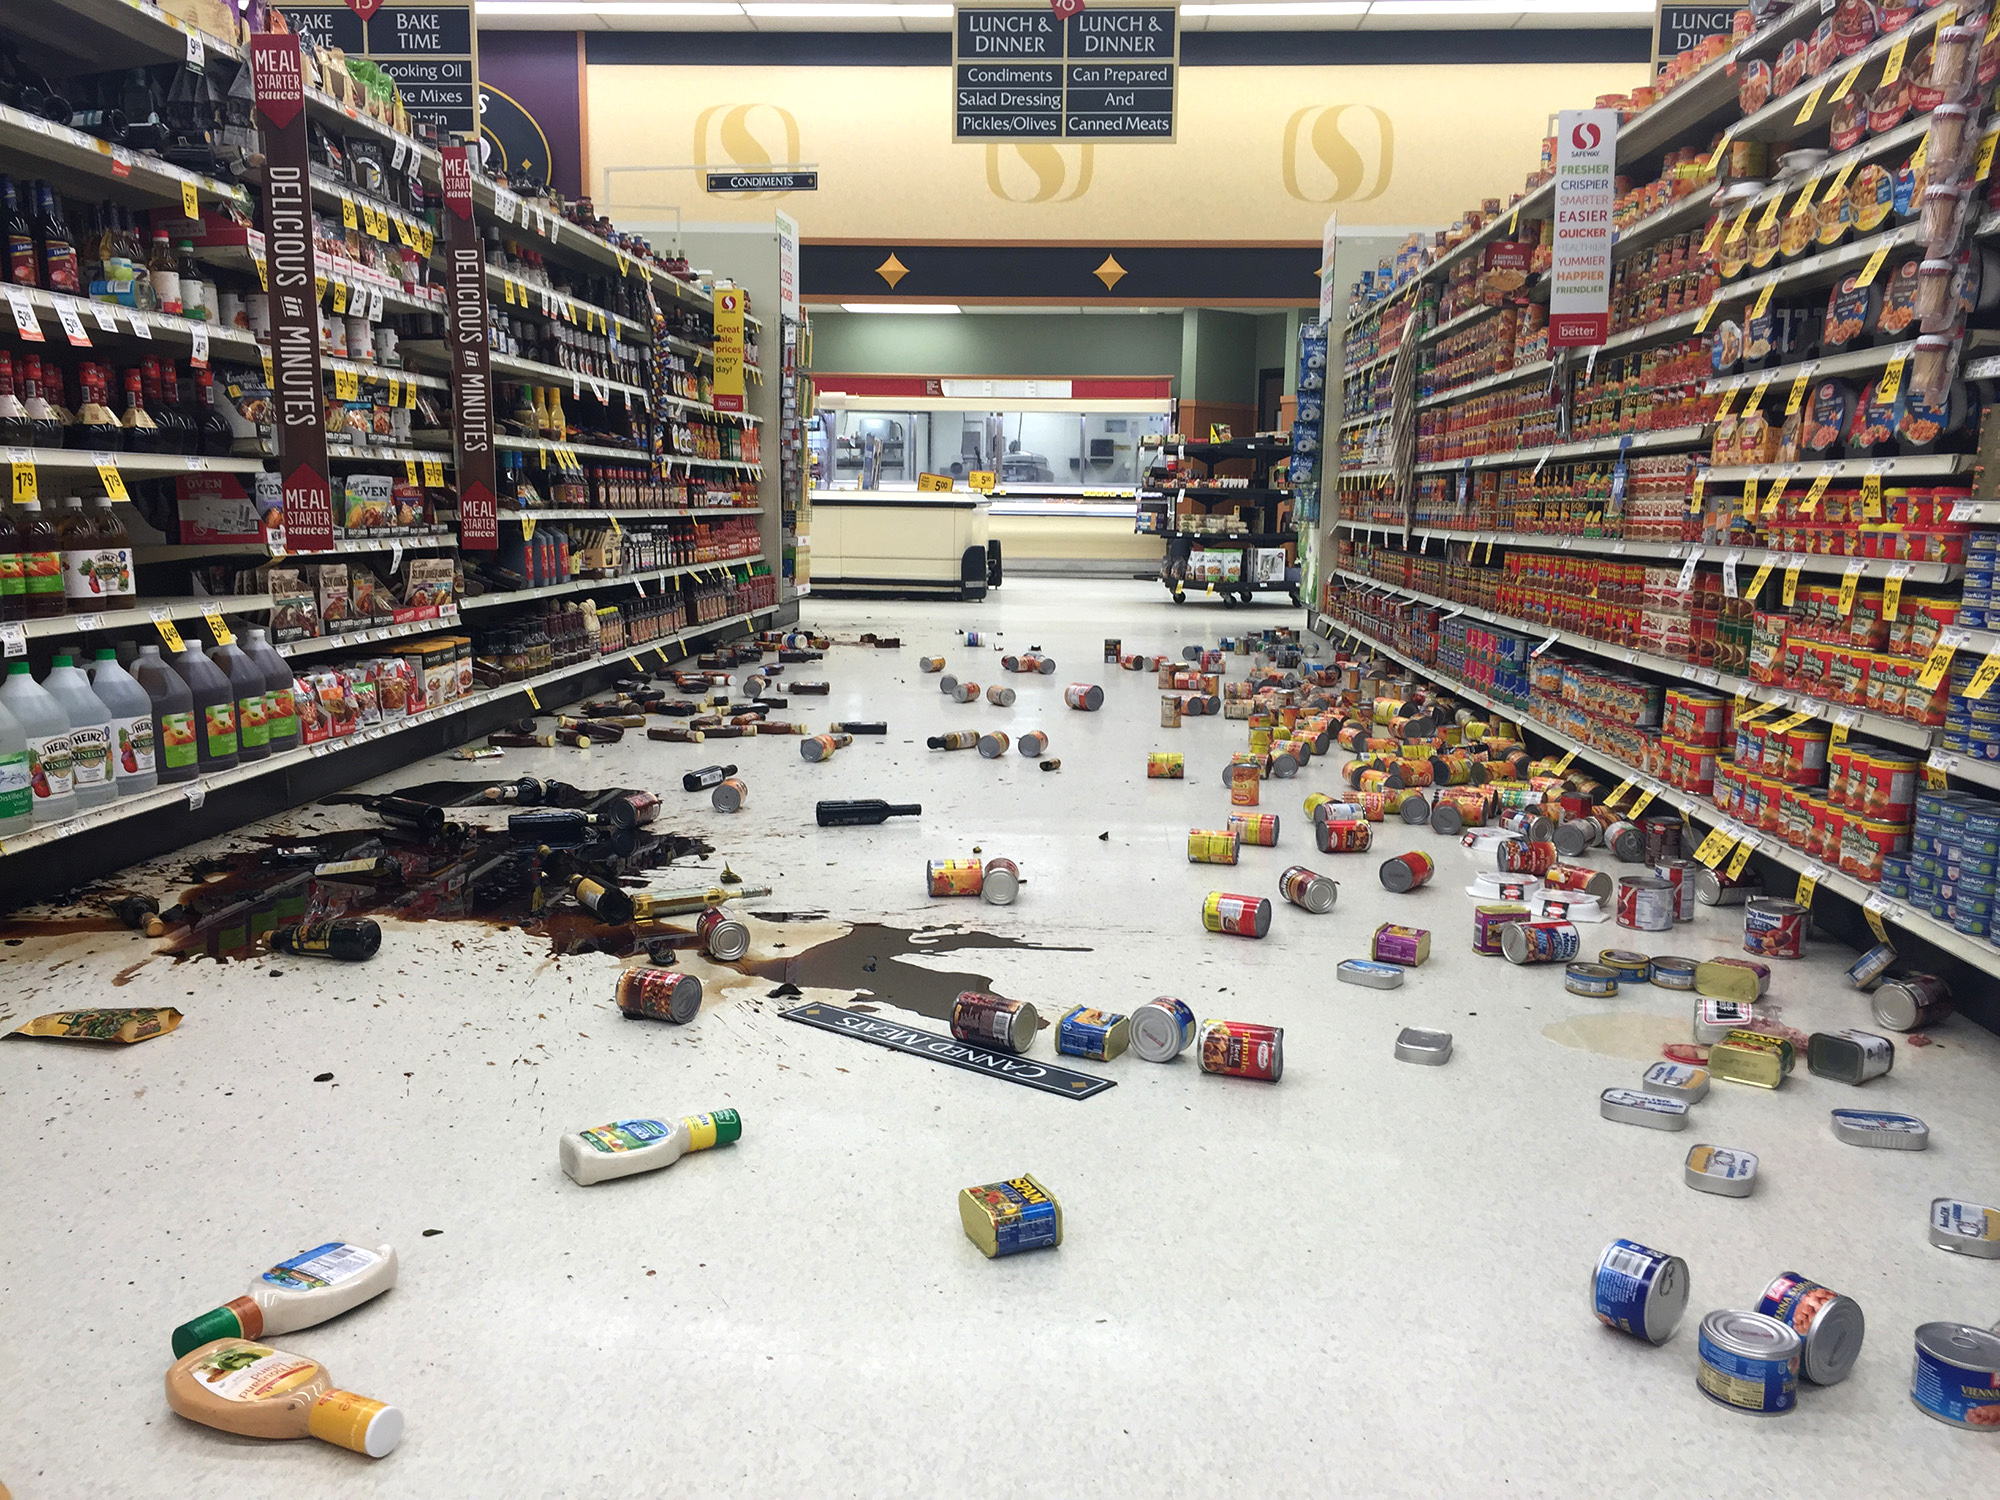 In this photo provided by Vincent Nusunginya, items fallen from the shelves litter the aisles inside a Safeway grocery store following a magnitude 6.8 earthquake on the Kenai Peninsula on Sunday Jan. 24, 2016, in south-central Alaska. The quake knocked items off shelves and walls in south-central Alaska and jolted the nerves of residents in this earthquake prone region, but there were no immediate reports of injuries.